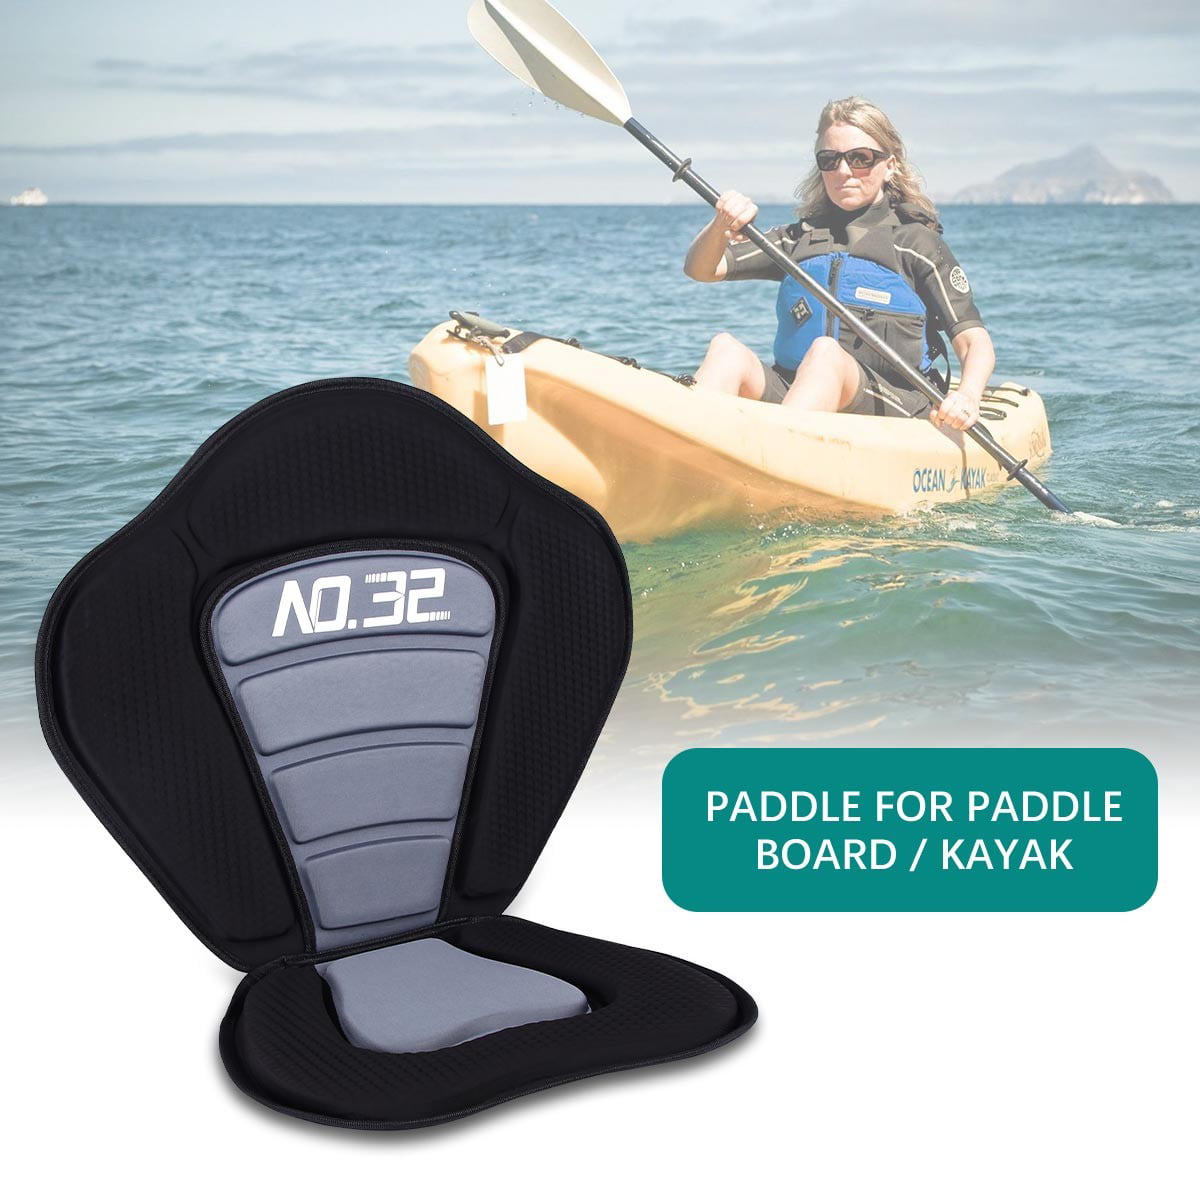 Kayak Adjustable Seat Detachable Deluxe Canoe Soft Seat Pad Only High Quality 